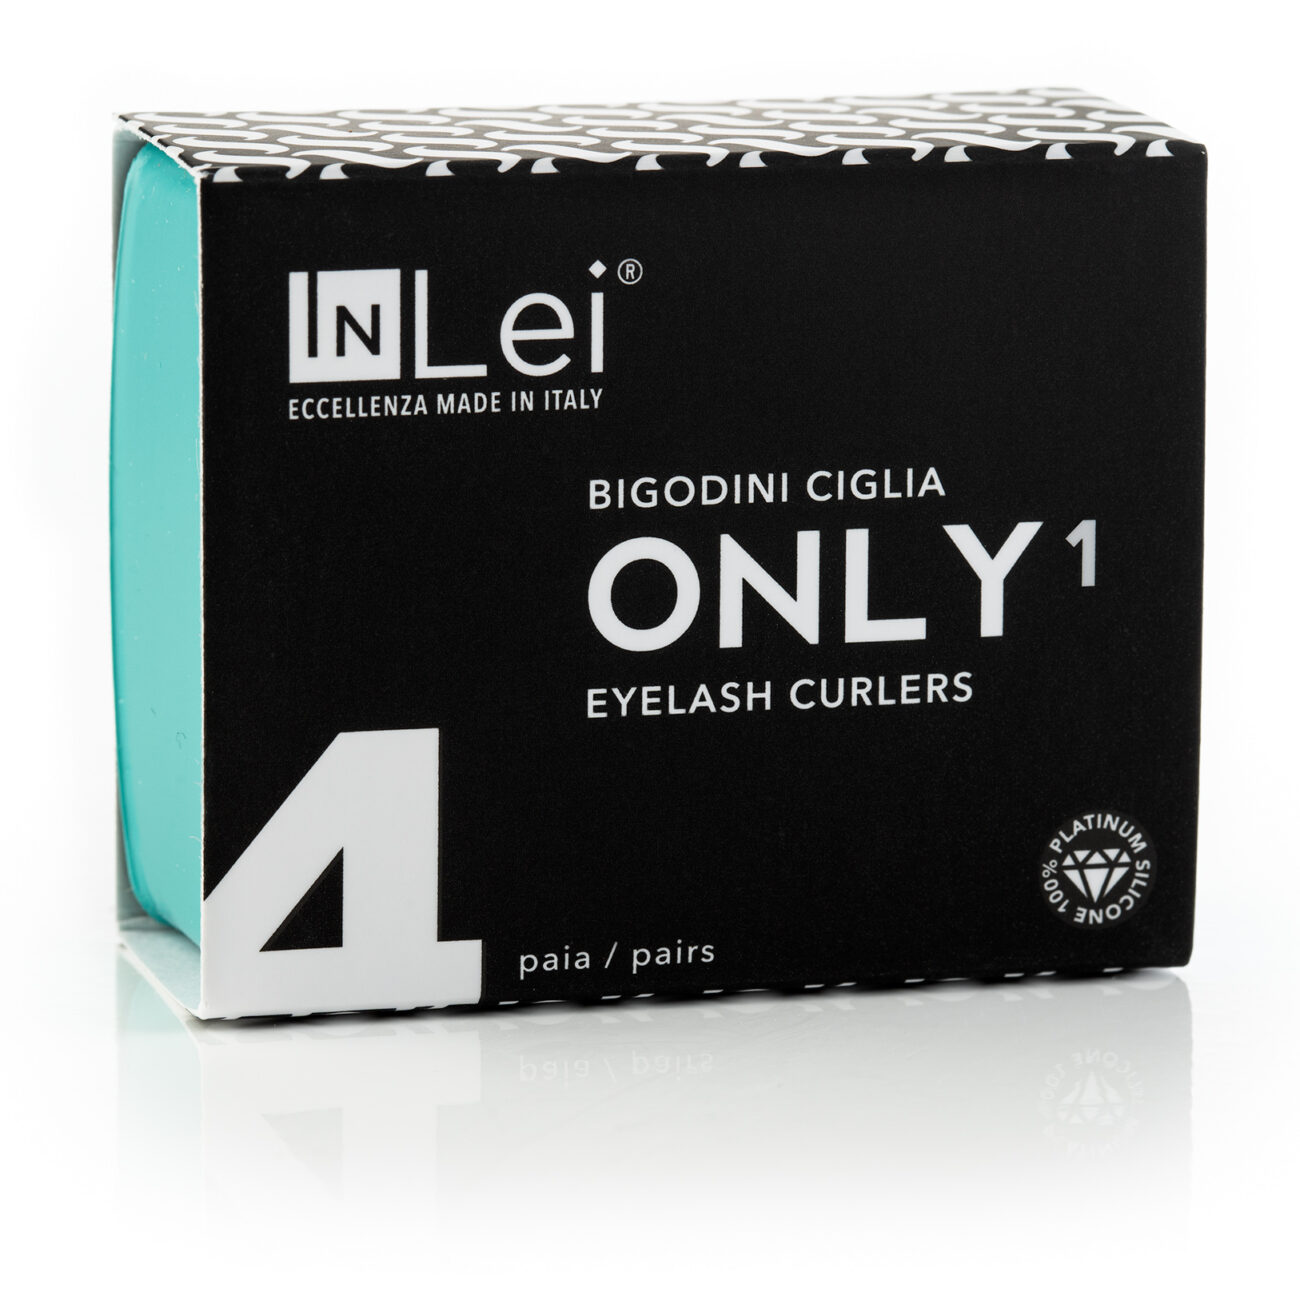 InLei ® Only1 | 4 Pairs S1-XL1 | Natural Curl